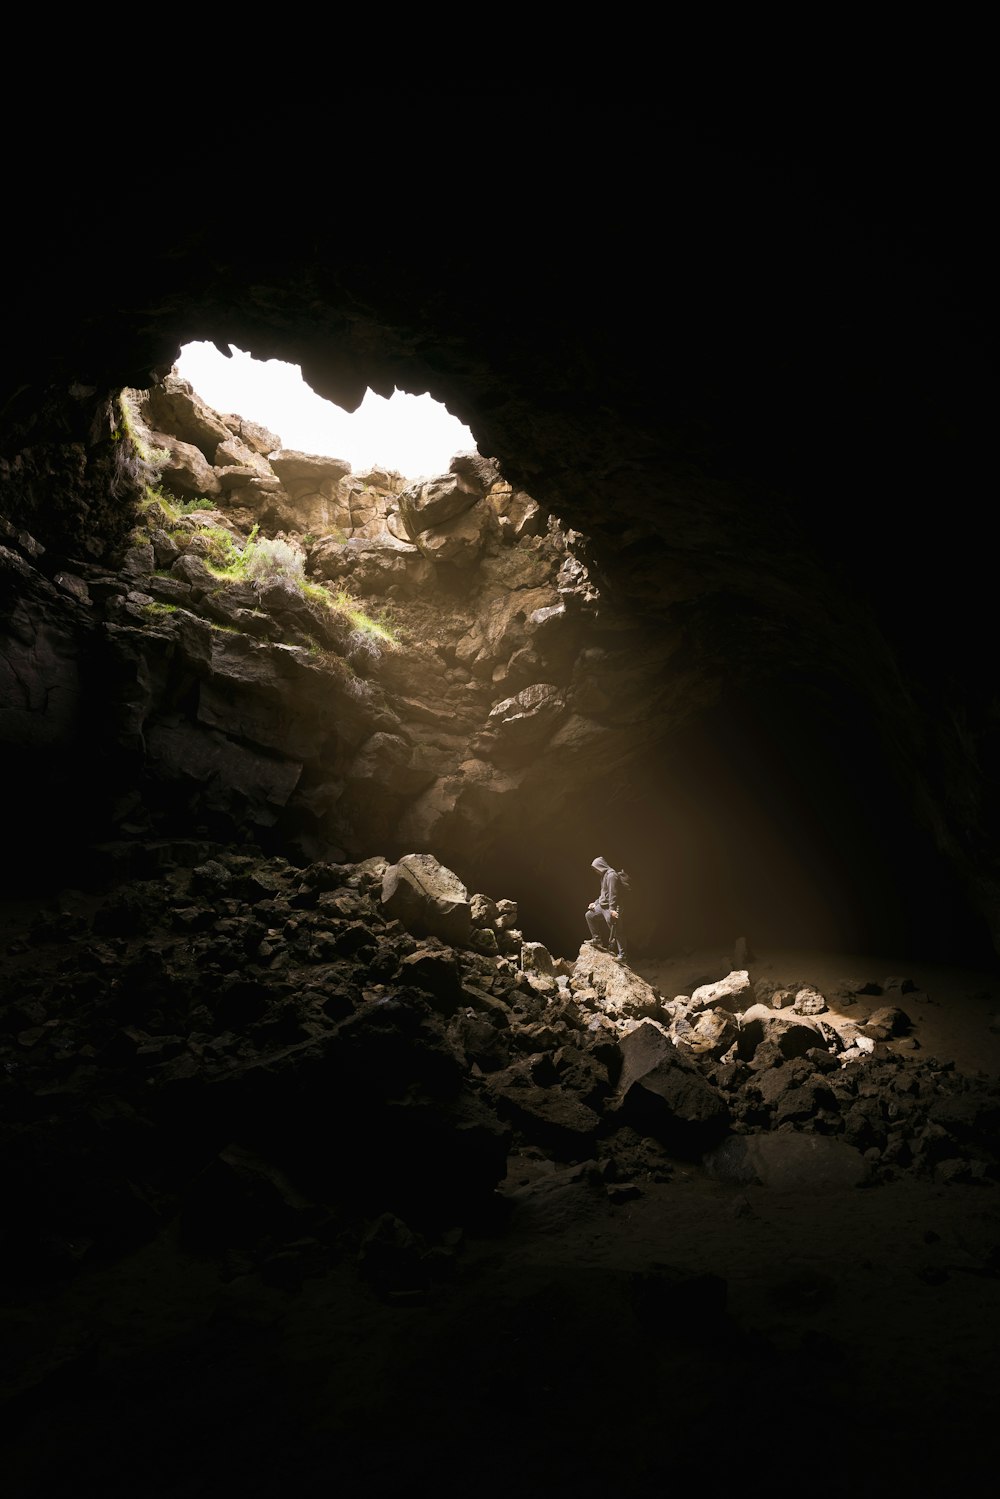 a person standing in a cave with a light coming through